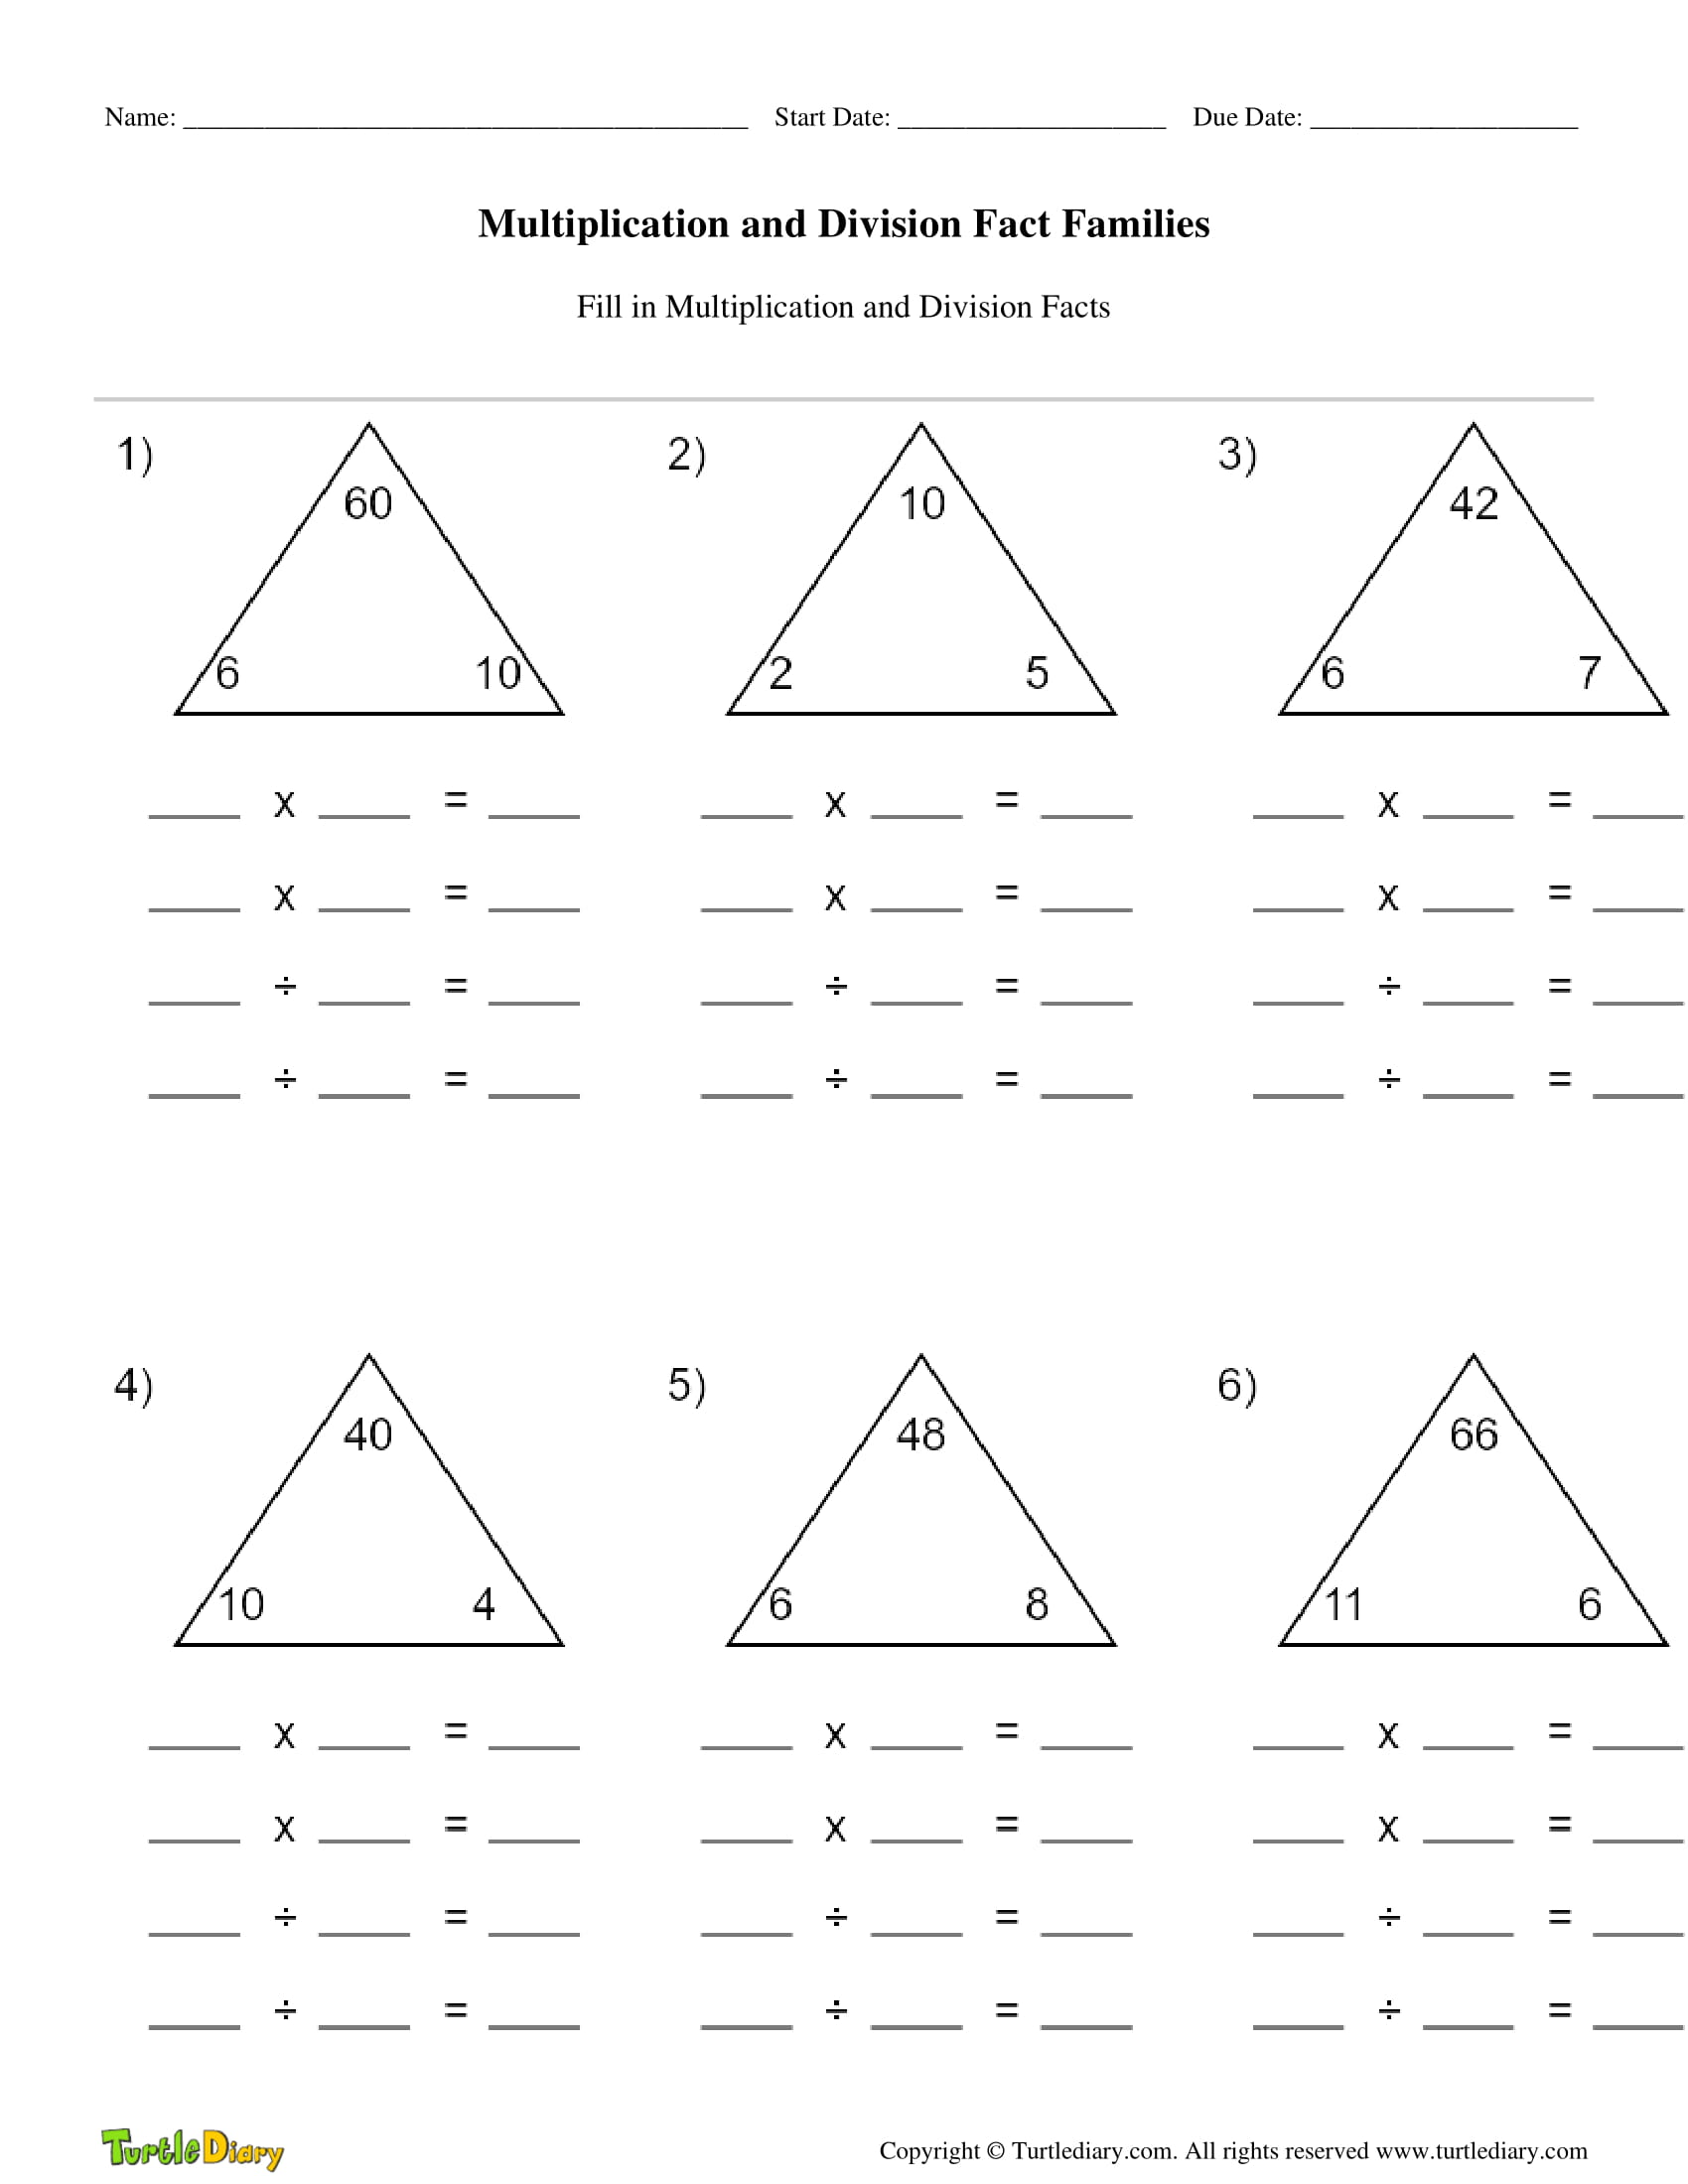 f-fact-families-multiplication-and-division-template-printable